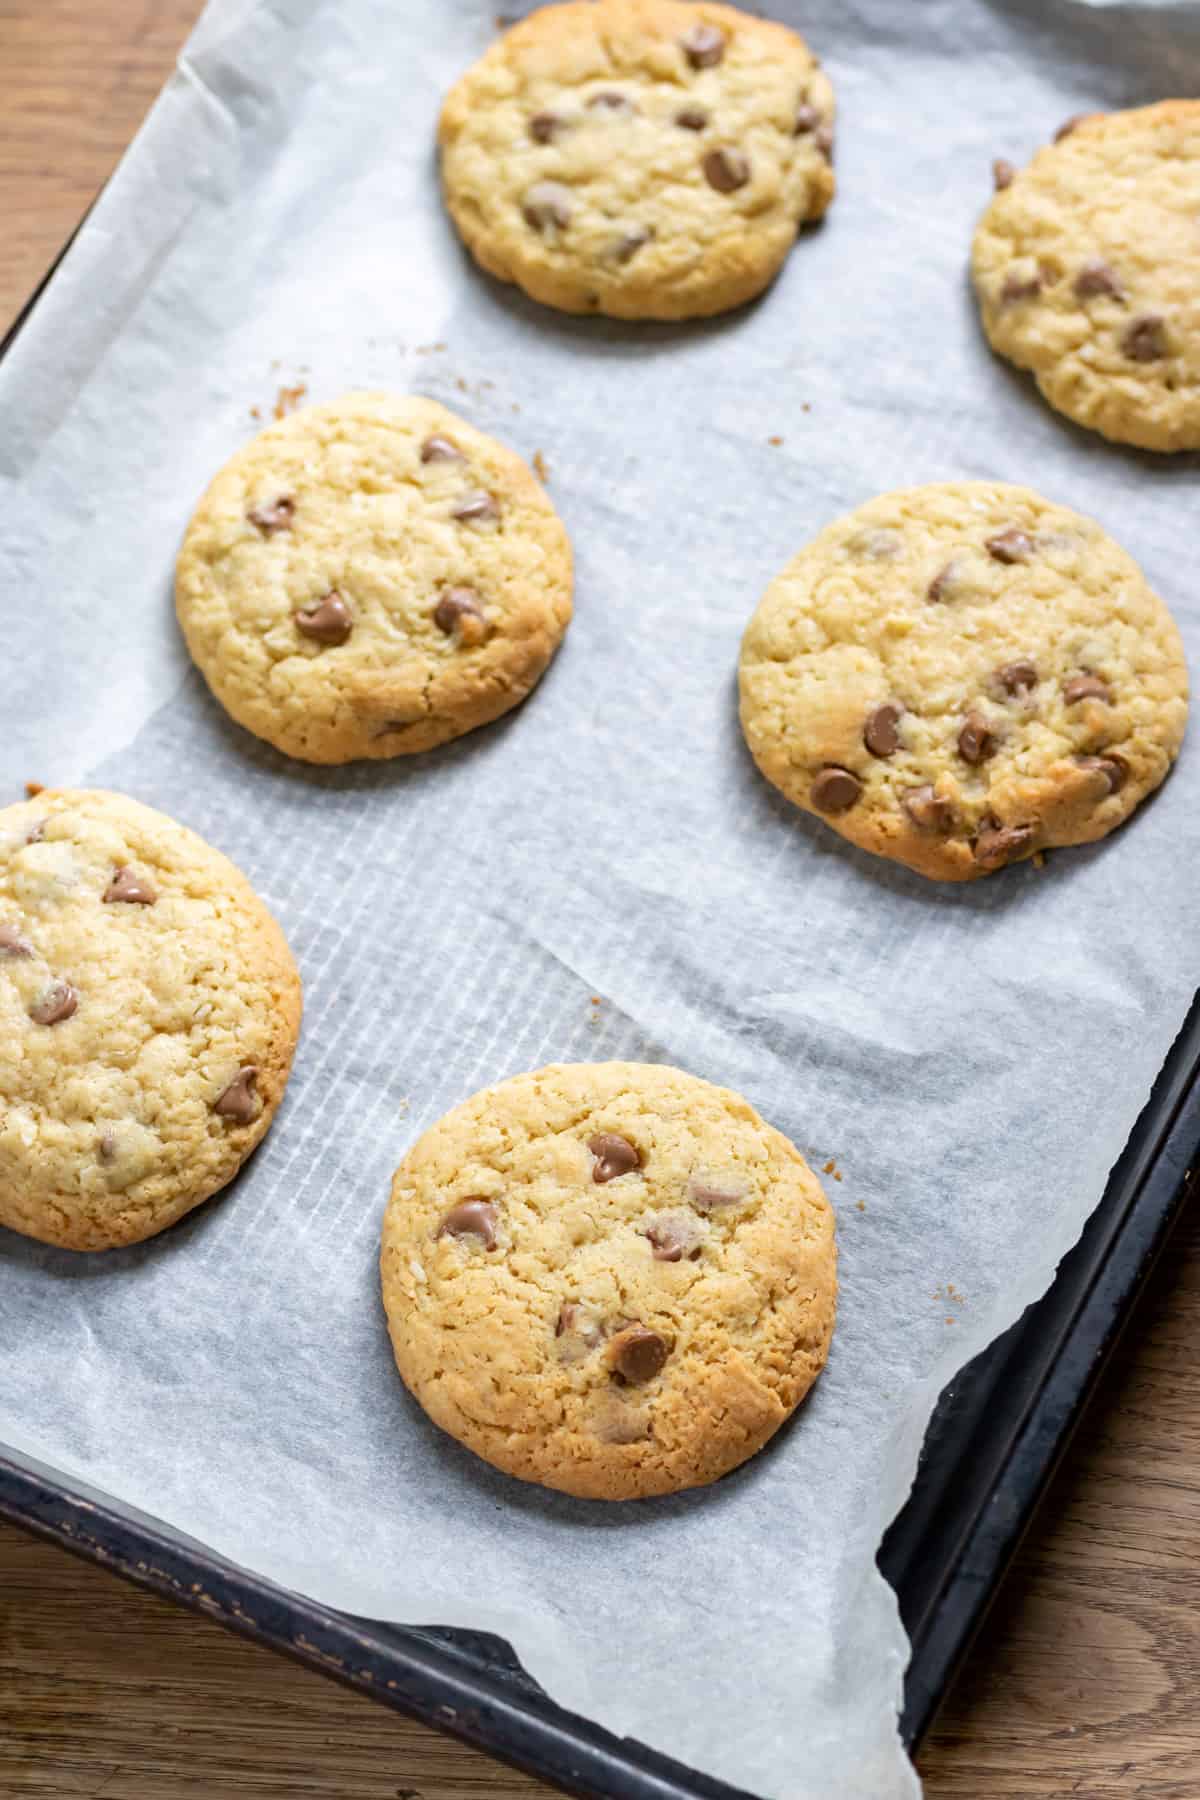 Baked chocolate chip coconut cookies.